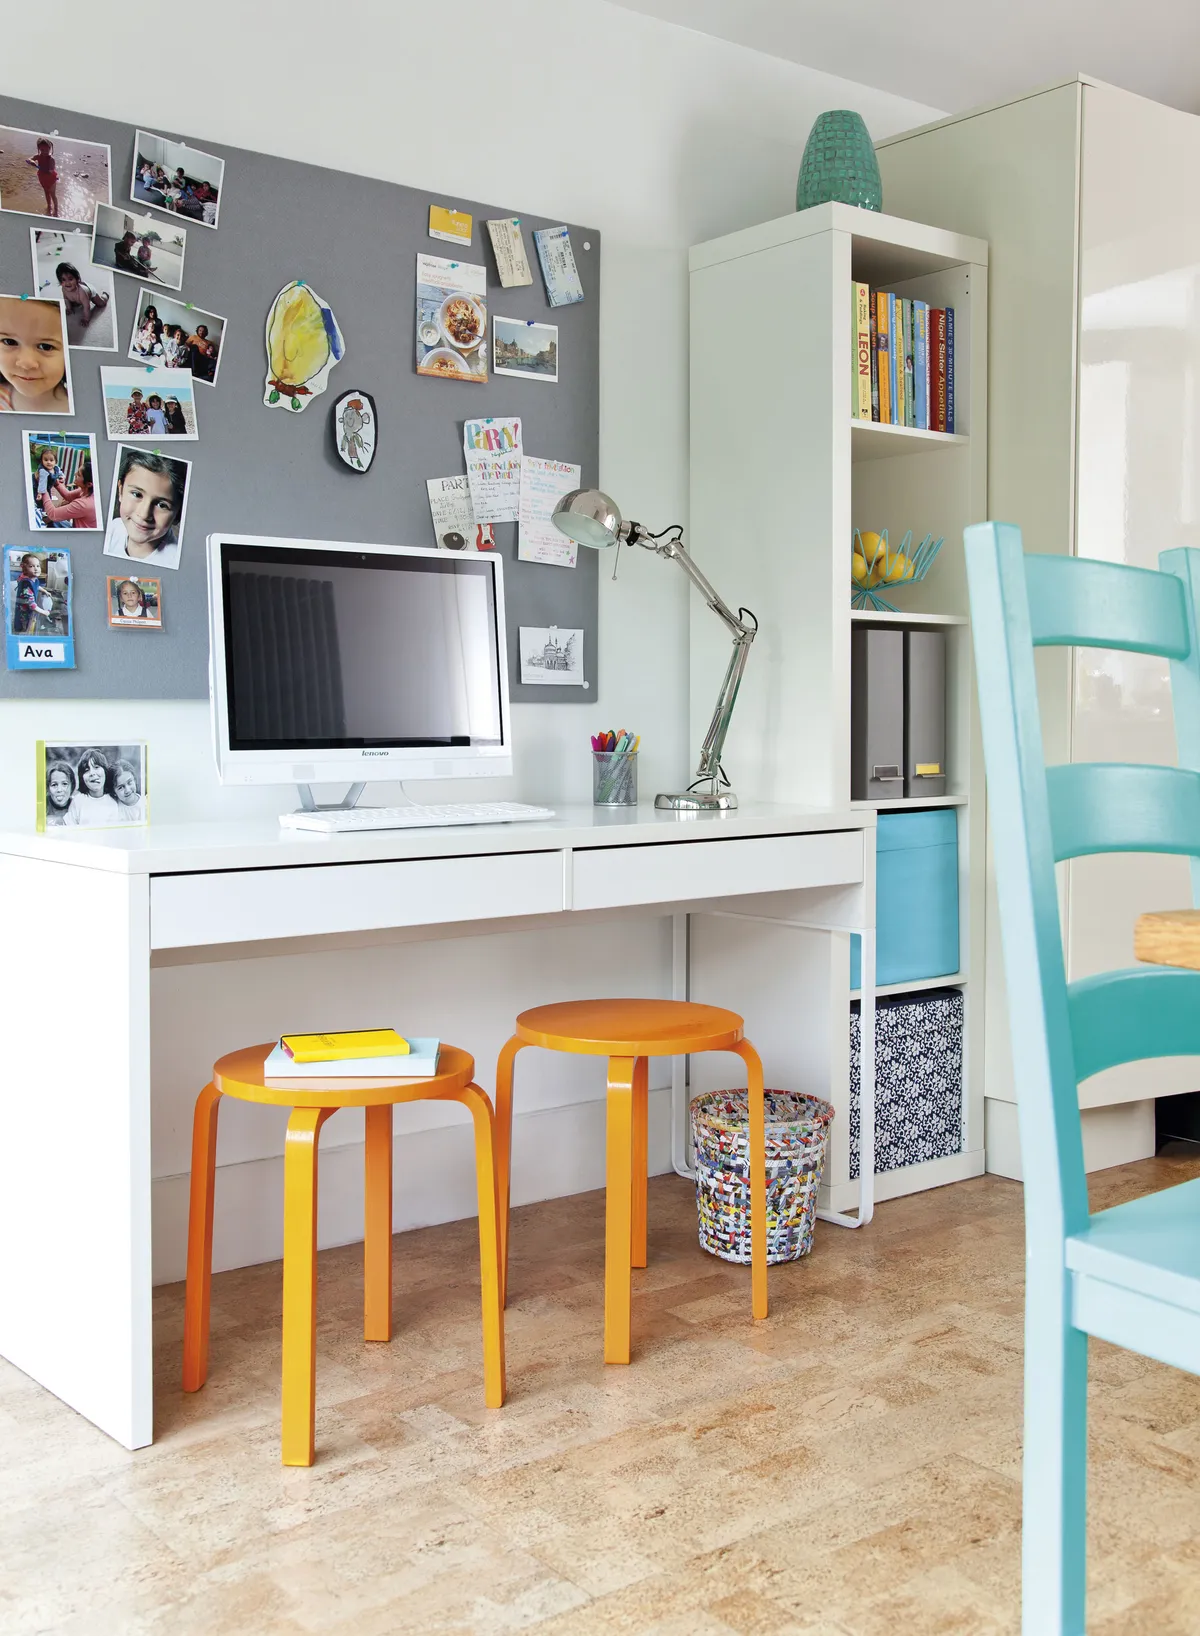 A kitchen desk area provides space for the computer and kids to do homework. The cork floor is a practical choice – it doesn’t show the dirt and is soft and warm underfoot. Cork is also an extremely sustainable resource as its harvest doesn’t require the felling of any trees